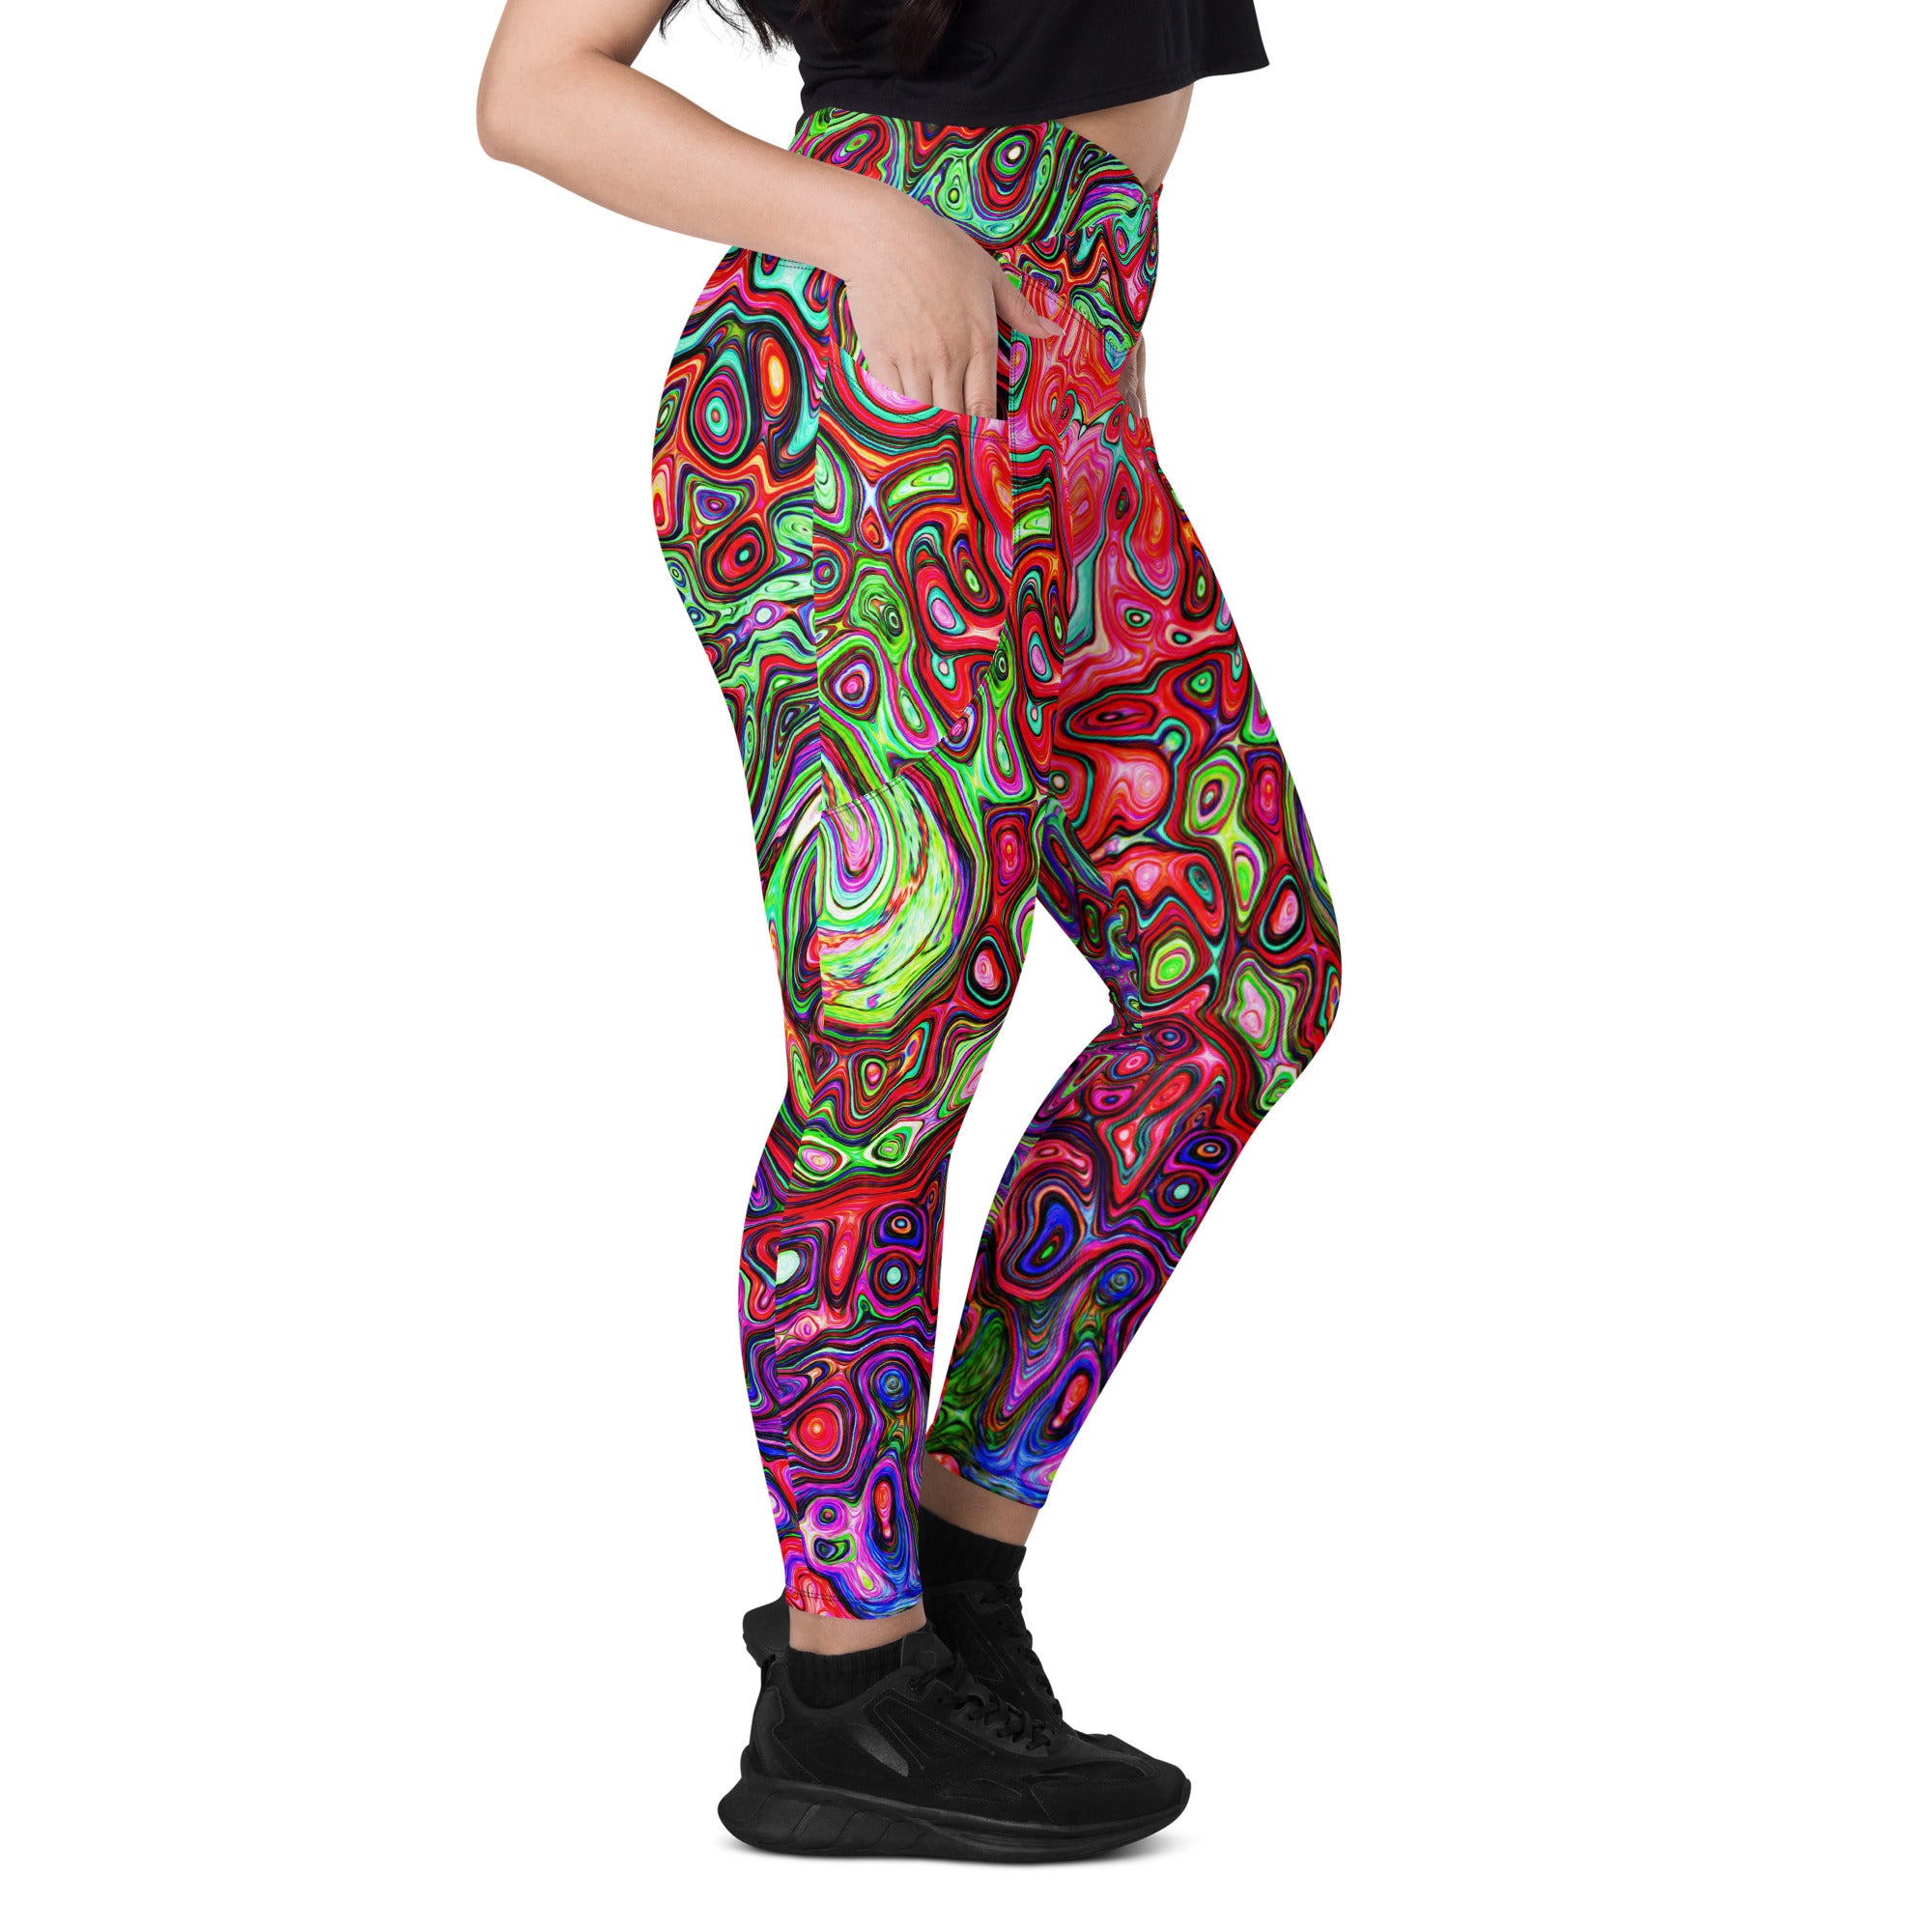 Crossover Leggings, Watercolor Red Groovy Abstract Retro Liquid Swirl